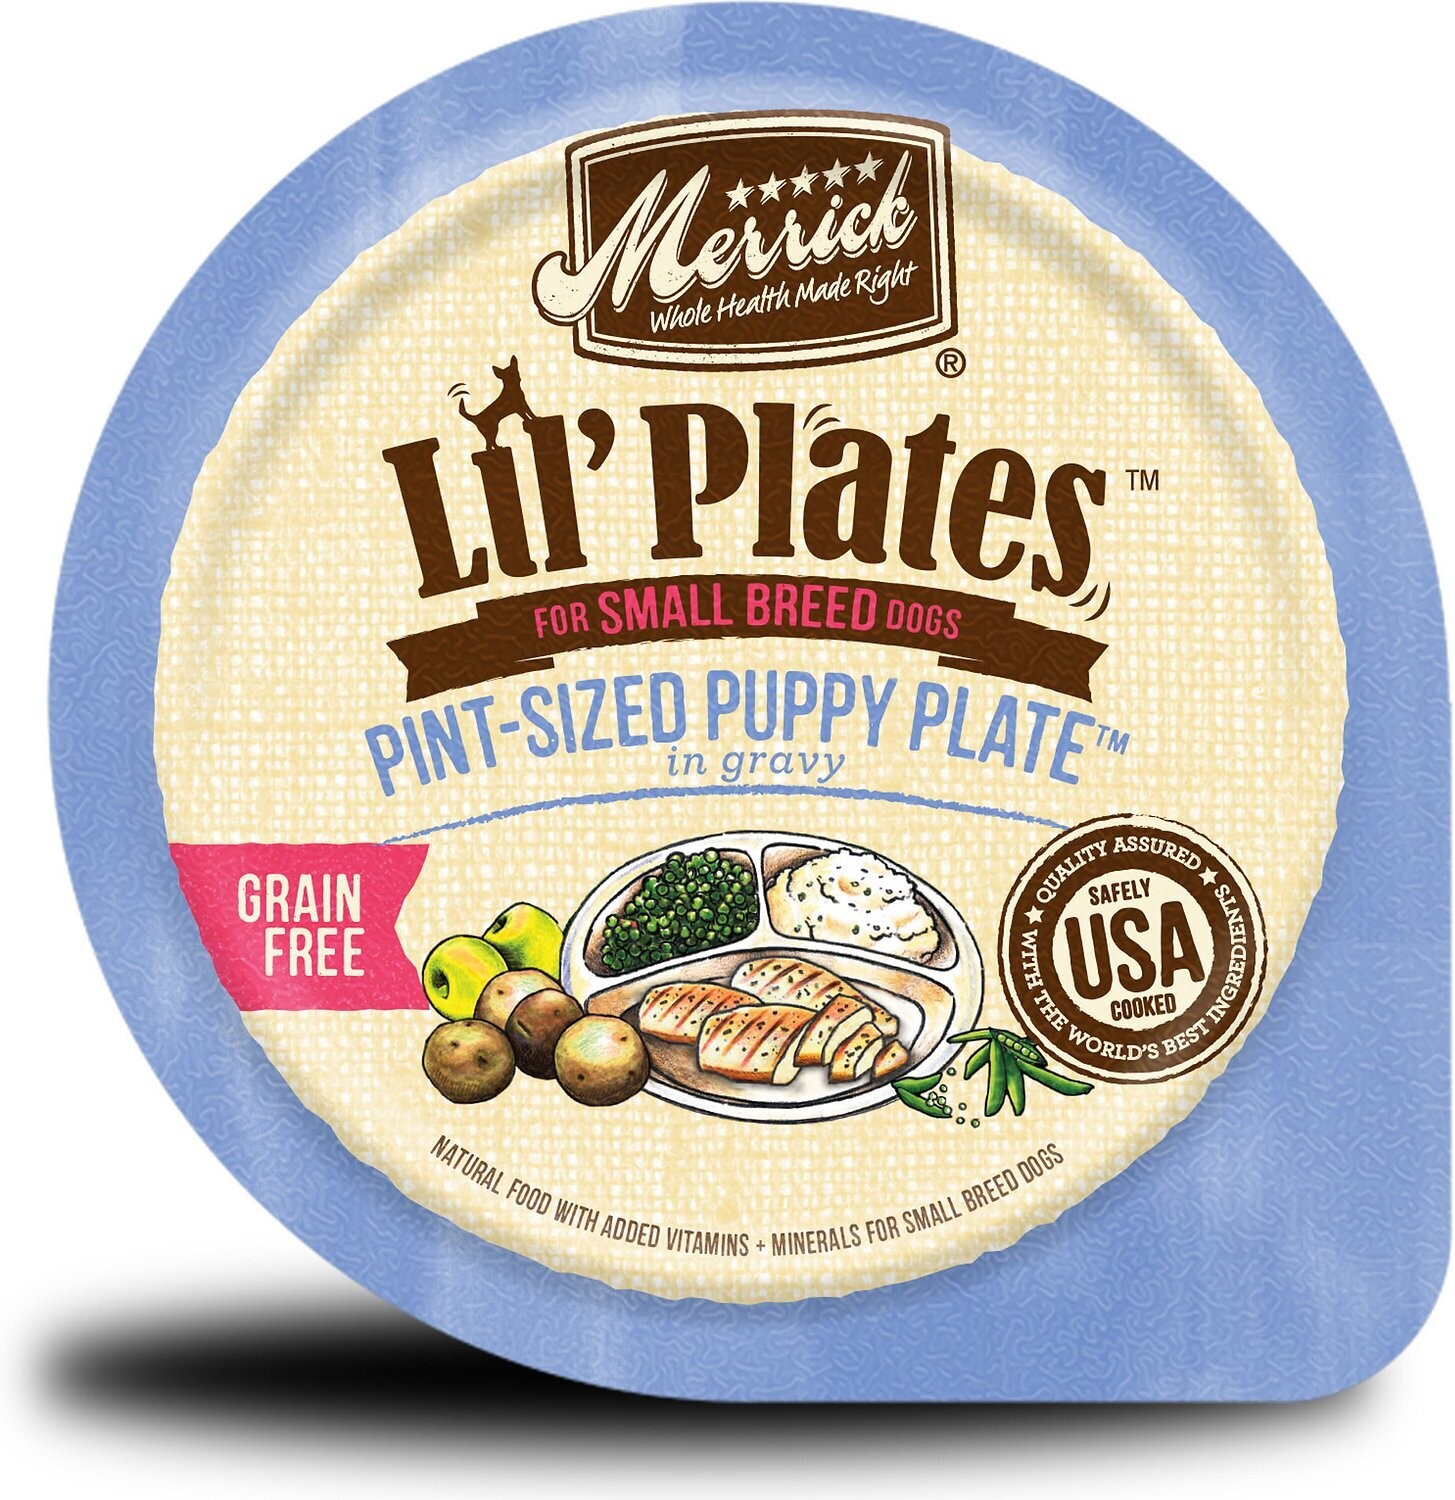 Merrick Lil' Plates Pint-Sized Puppy Plate cup 3.5oz 12/case